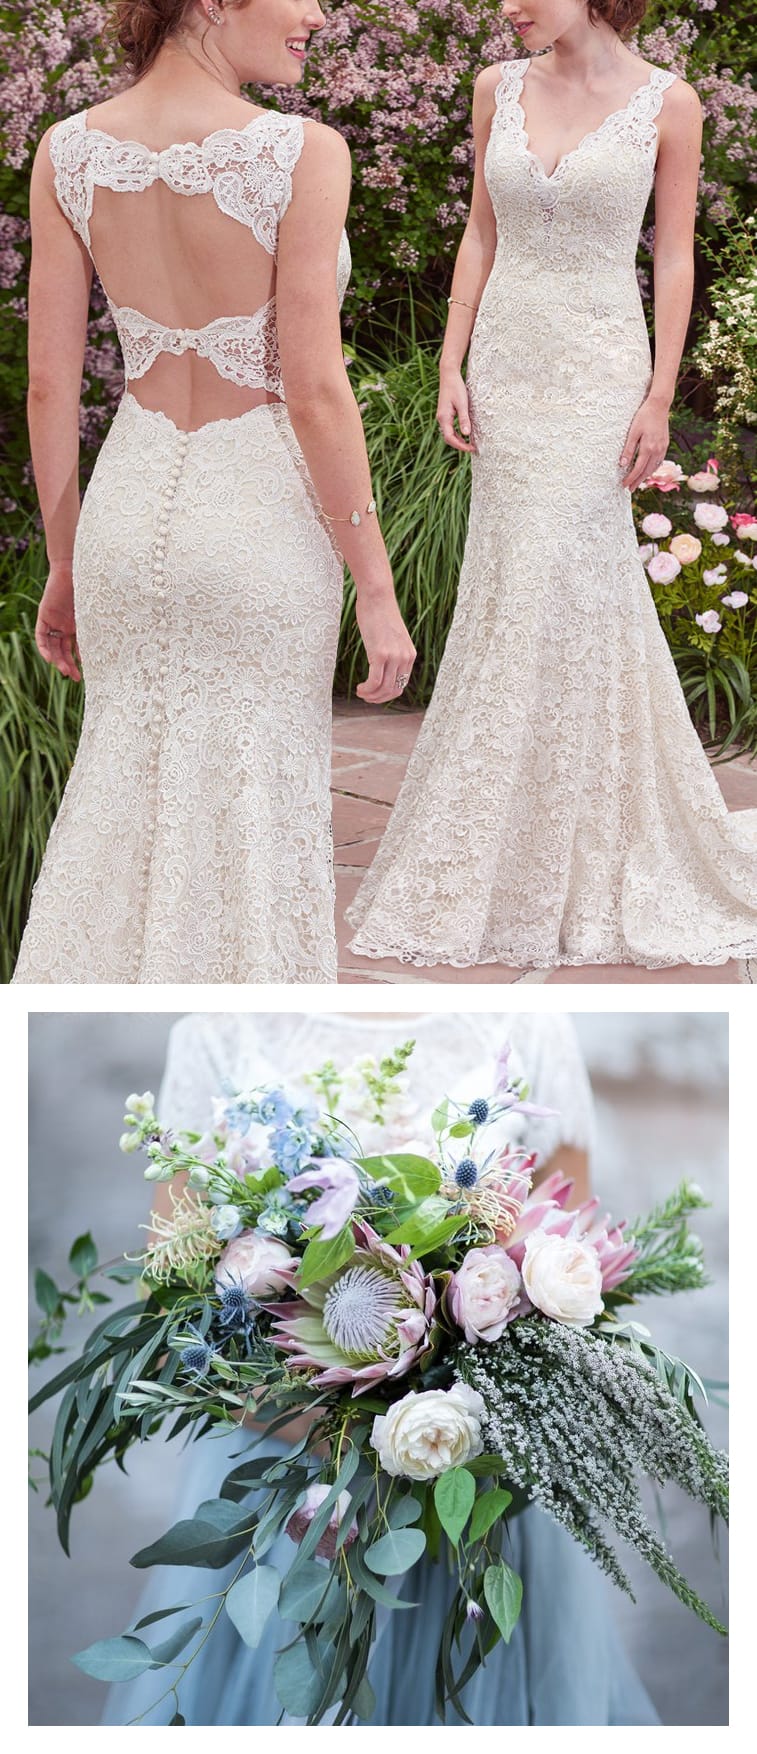 9 Boho Bouquets For Your Eclectic Wedding Gown - Lace boho wedding dress with double keyhole back Hope by Rebecca Ingram. Photo: Tyler Rye Photography | Bouquet: By Bloomers